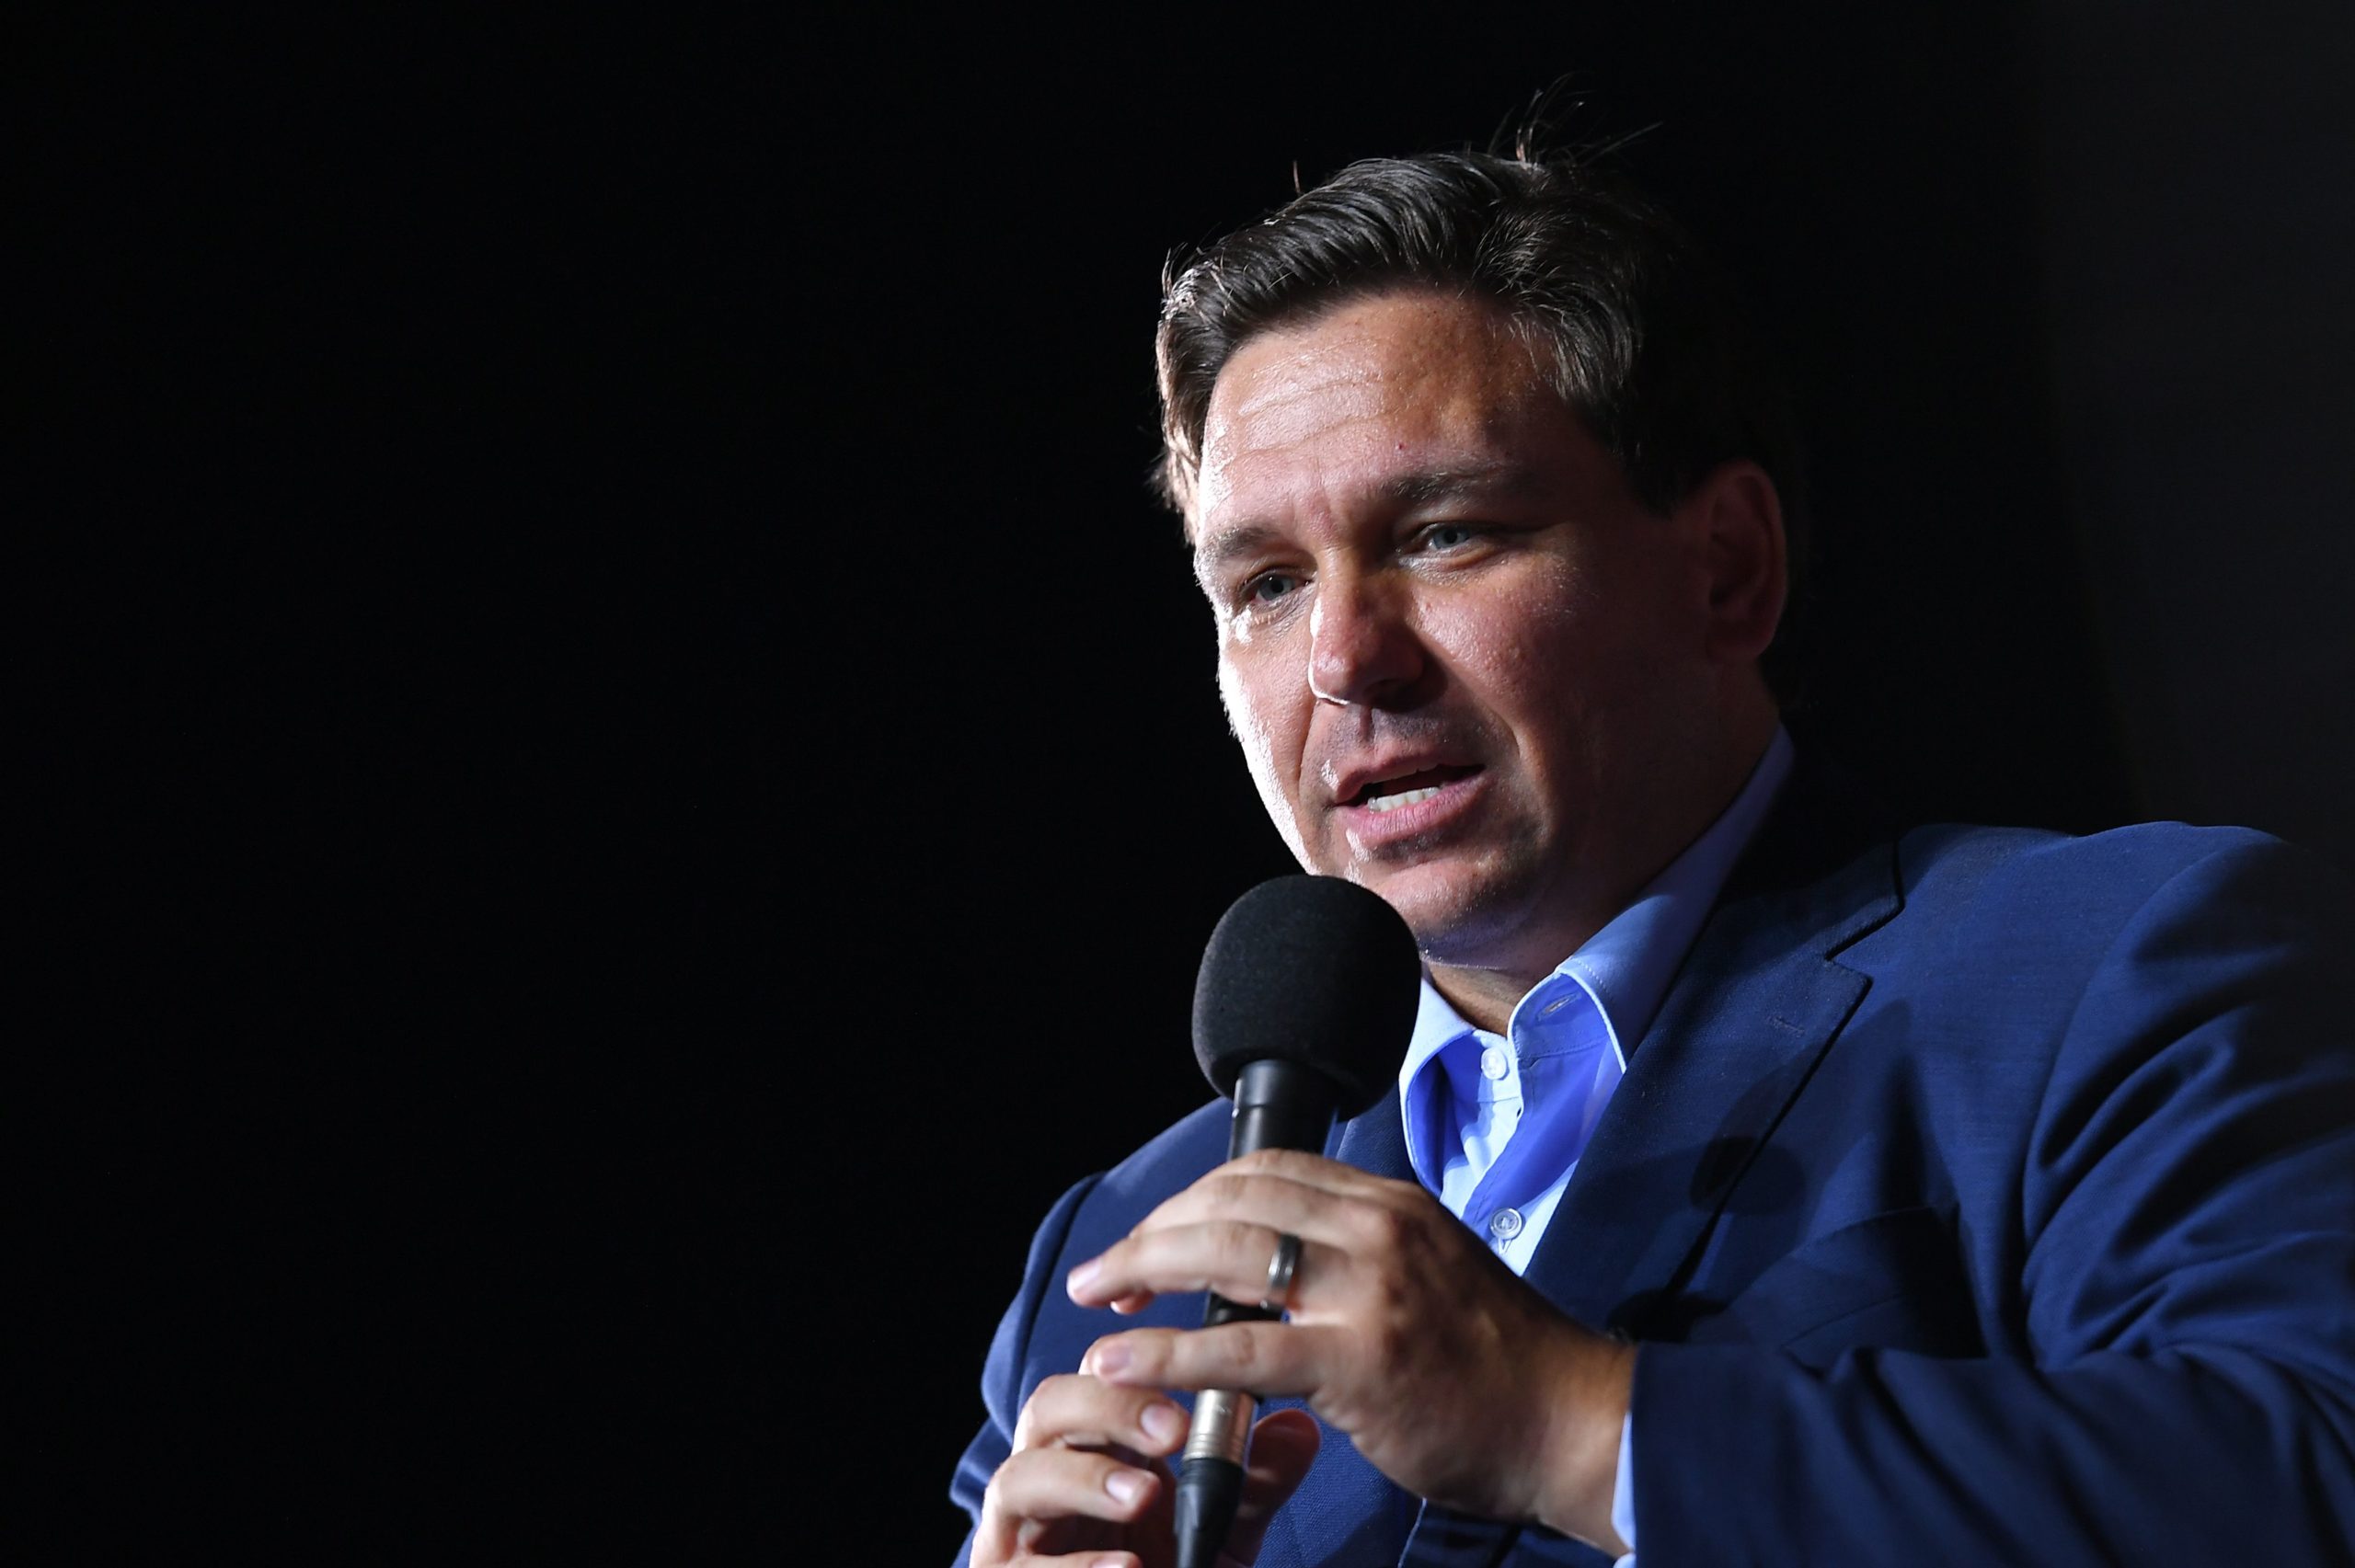 Florida Gov. Ron DeSantis speaks during a campaign rally for then-President Donald Trump at Pensacola International Airport in Pensacola, Florida, on Oct. 23, 2020.